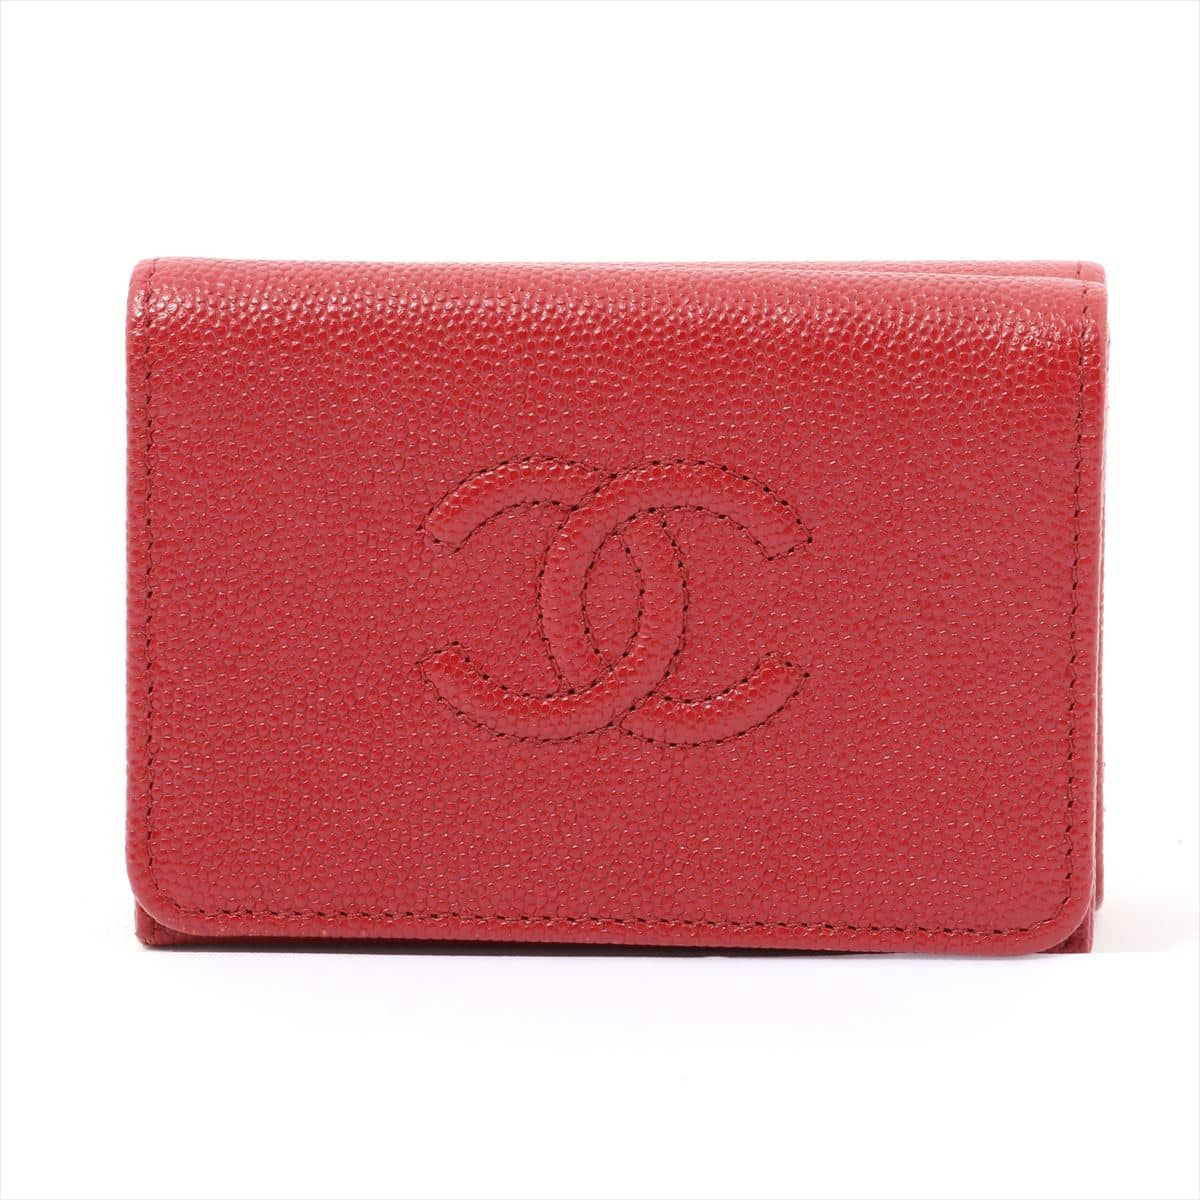 Chanel Coco Mark Caviarskin Wallet Red 27th